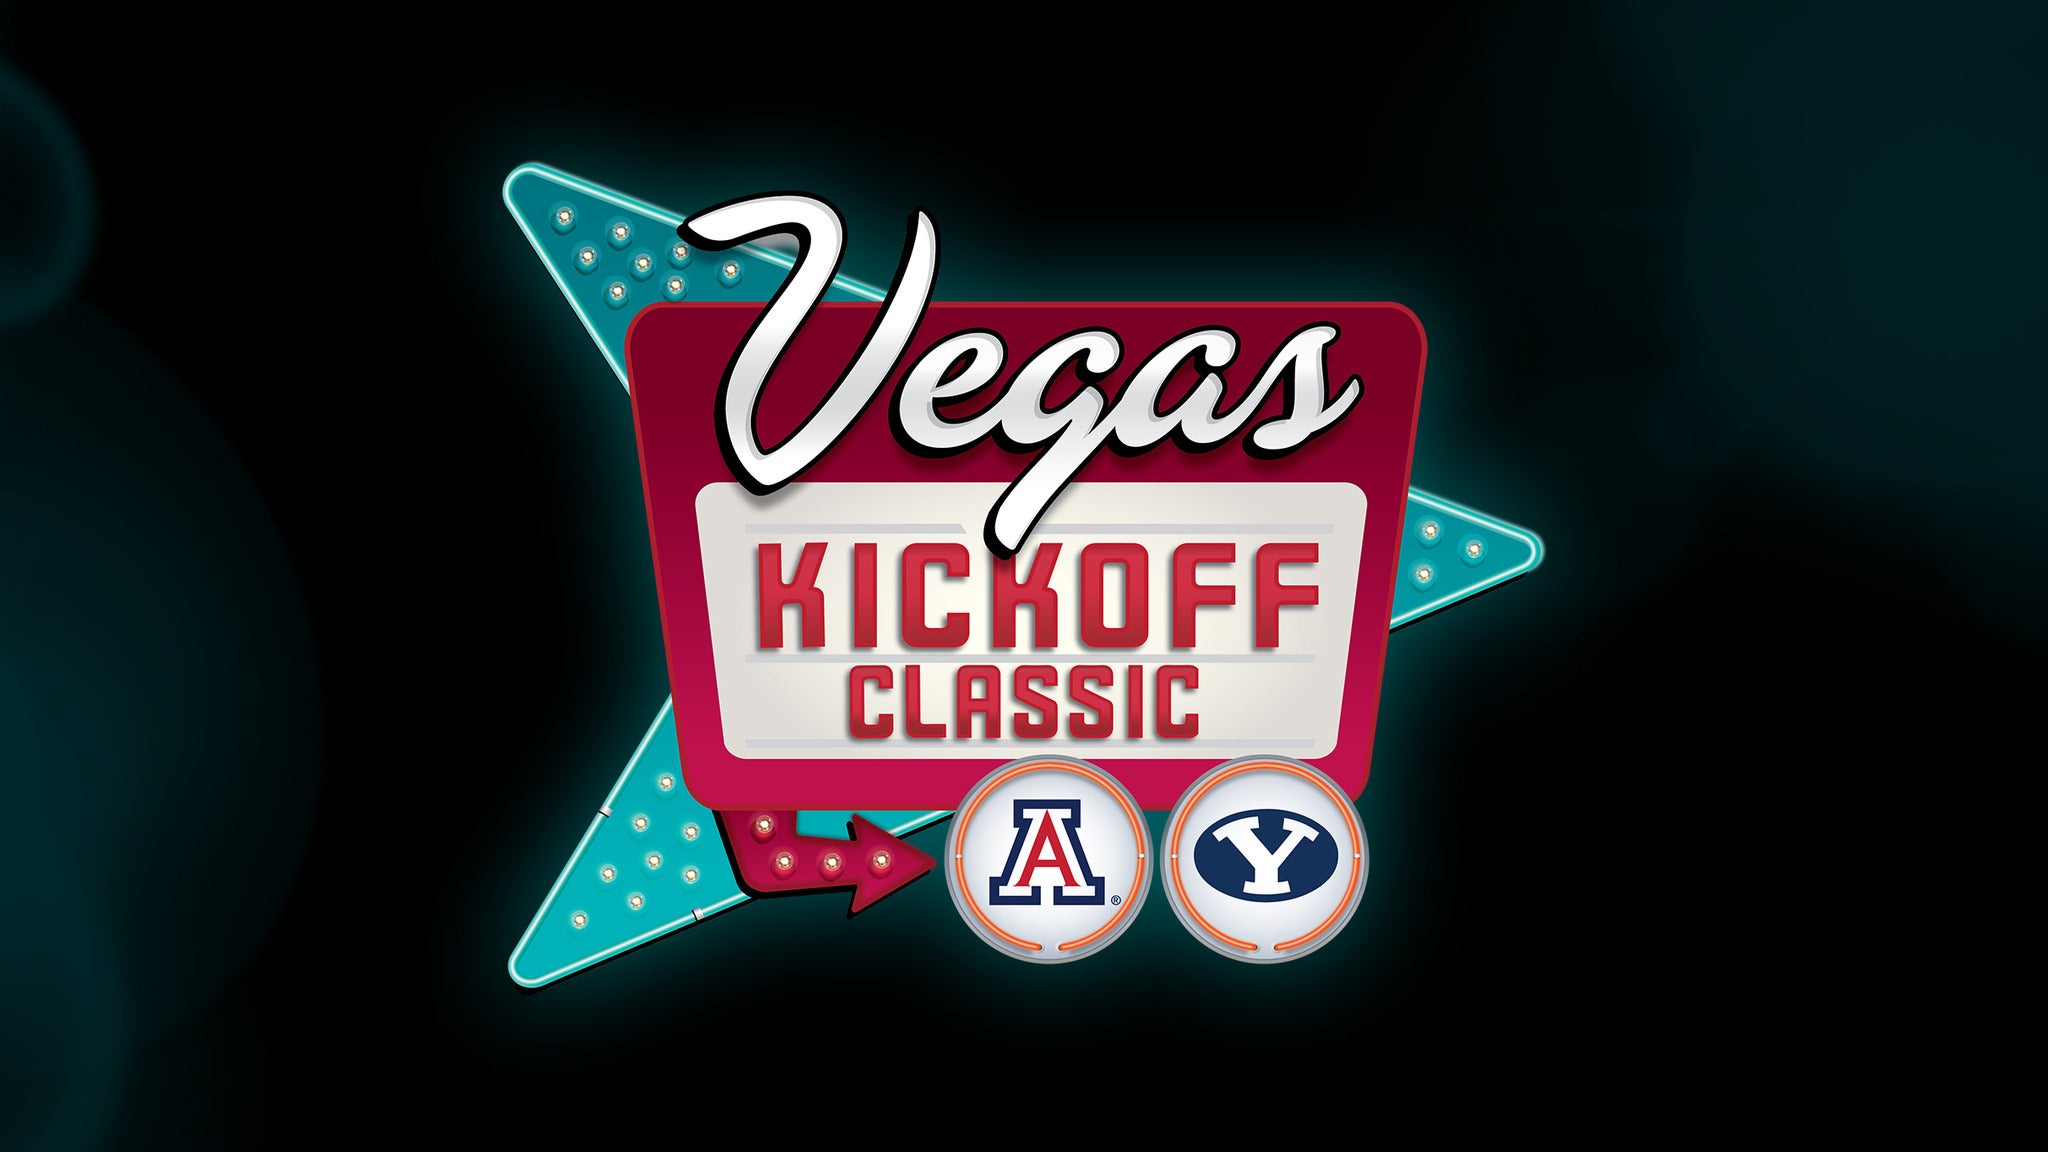 Vegas Kickoff Classic Tickets Single Game Tickets & Schedule